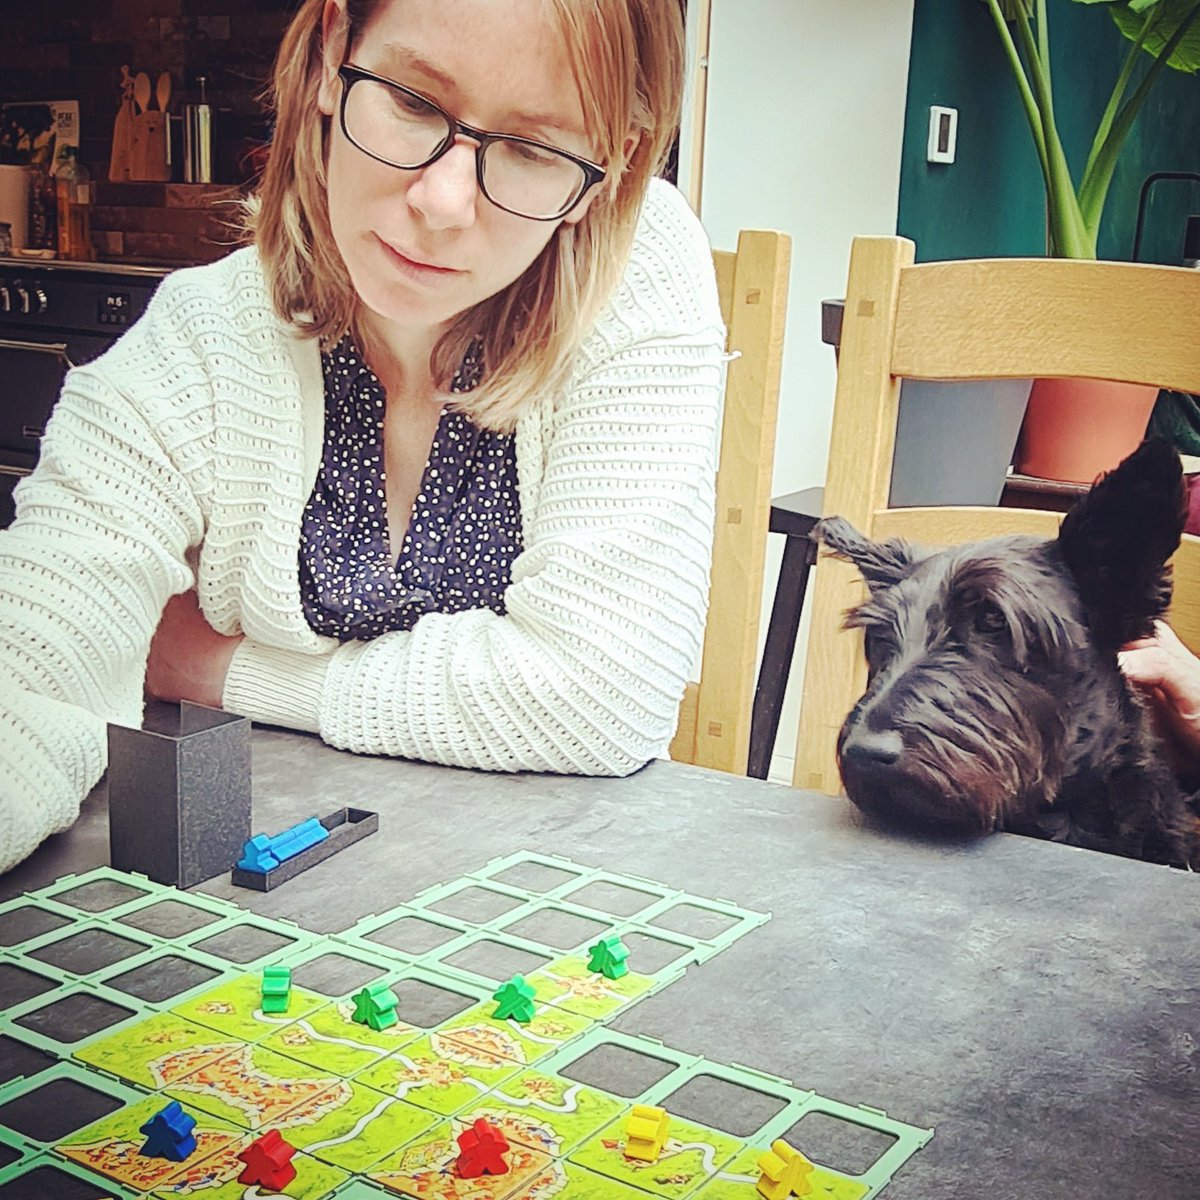 Bank holiday board games. Who will win - Milly or Wilma? 😄🥰